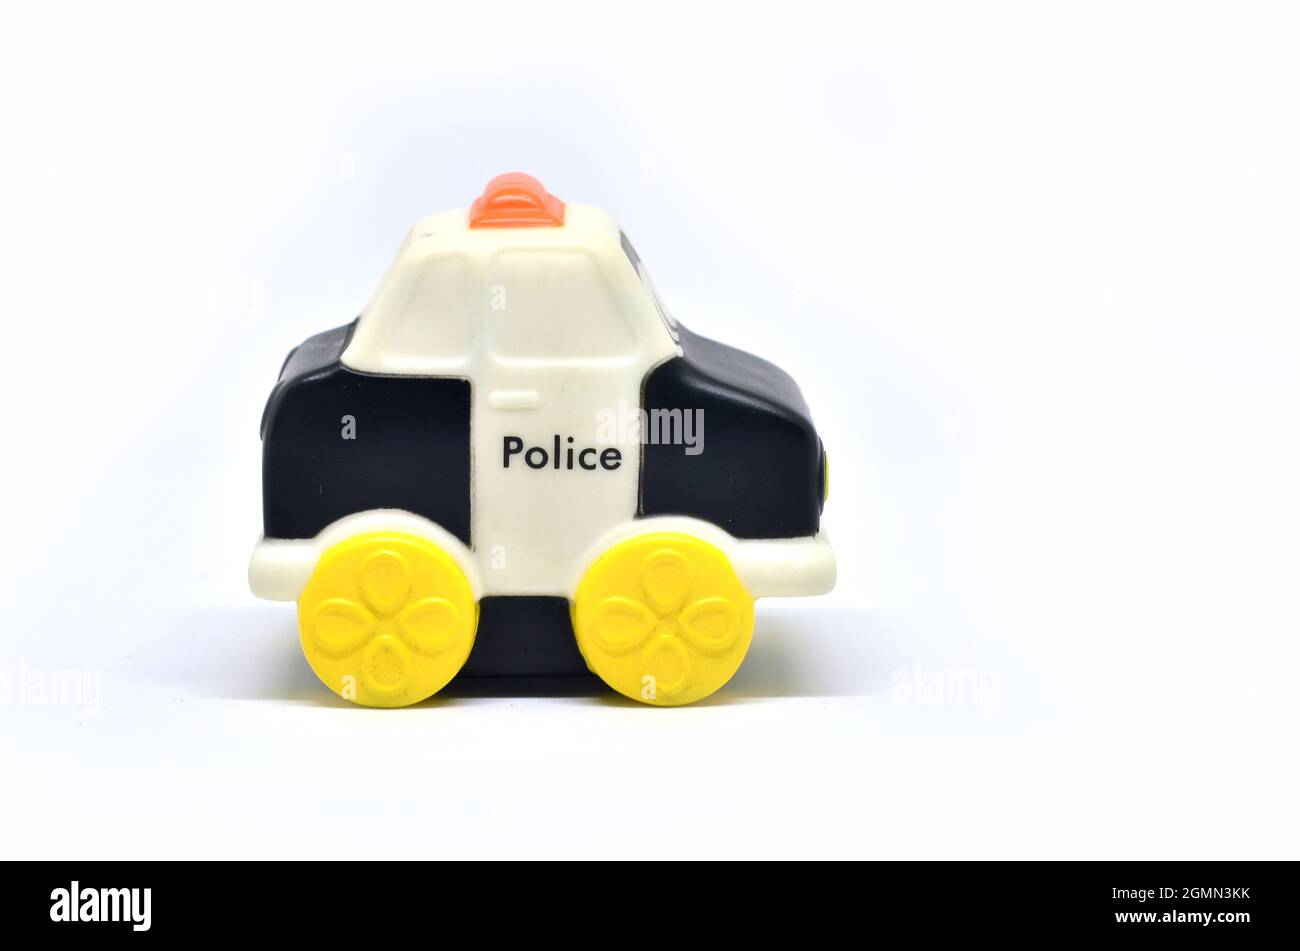 Rubber police toy car on a white background Stock Photo